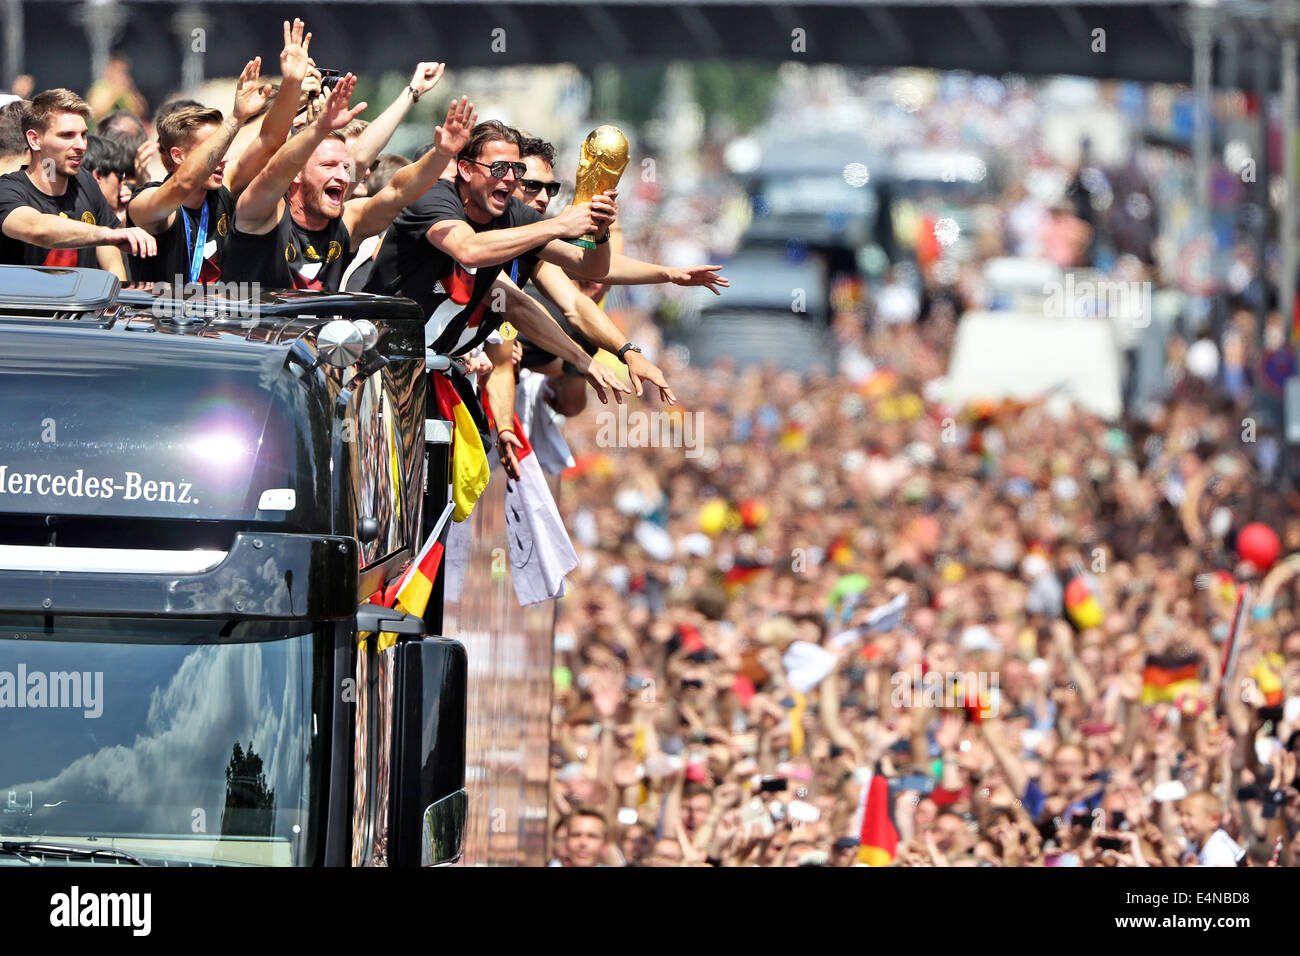 Berlin, Germany. 15th July, 2014. The players of the German national soccer team celebrate on a truck during their return to Berlin, Germany, 15 July 2014. The German team on 13 July 2014 had won the Brazil 2014 FIFA Soccer World Cup final against Argentina by 1-0 to win the title for the fourth time after 1954, 1974 and 1990. Photo: JAN WOITAS/DPA/Alamy Live News Stock Photo